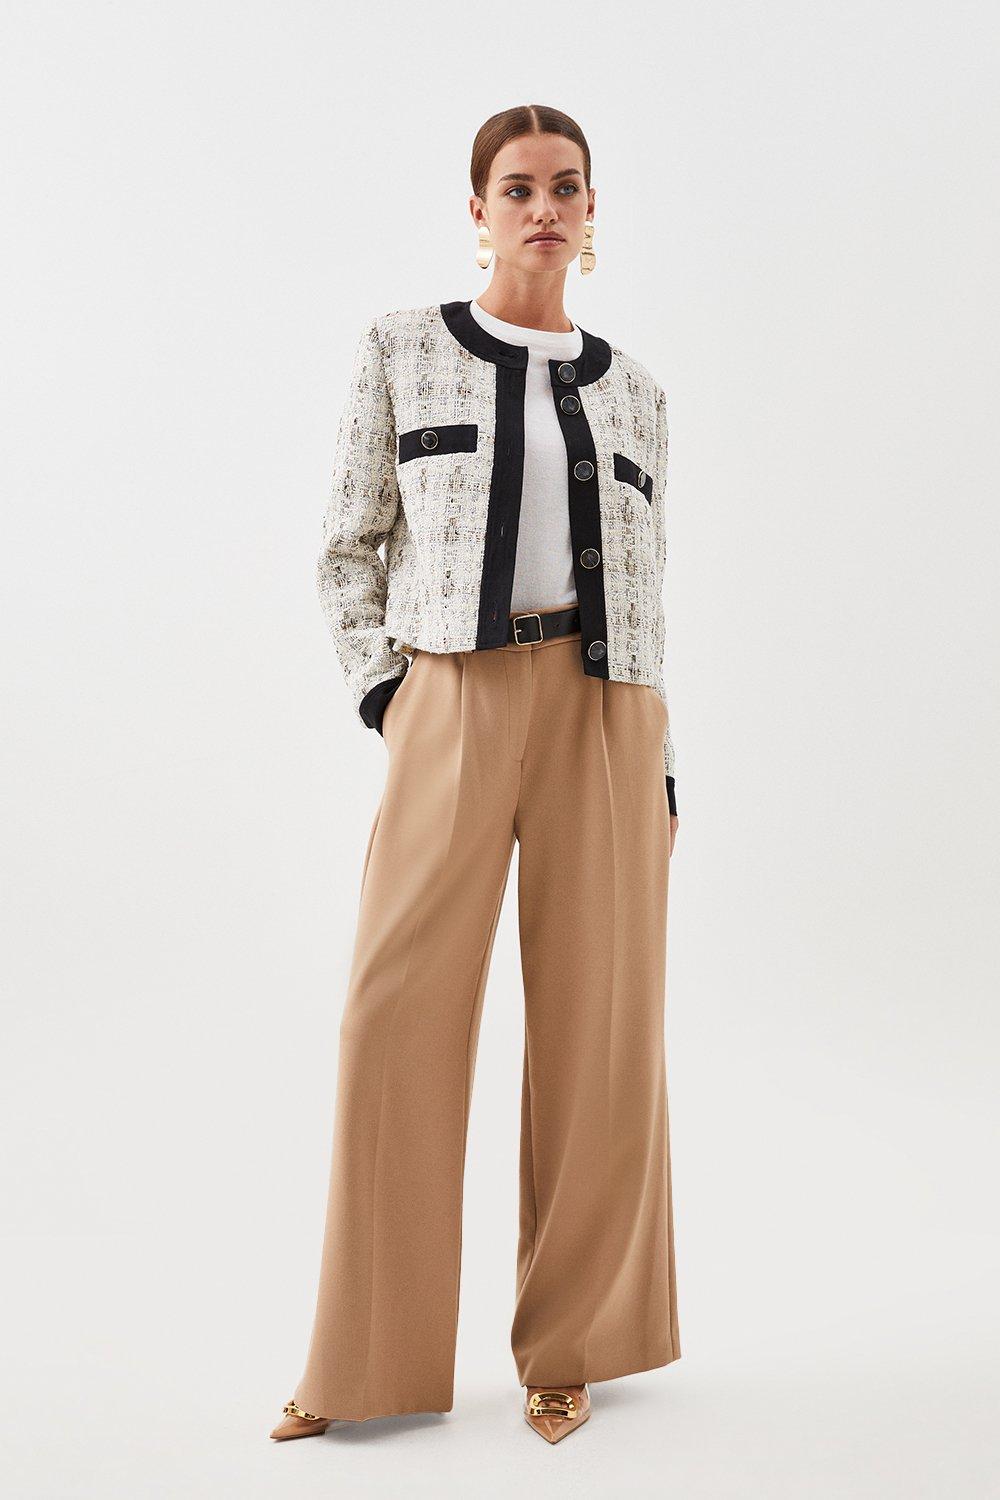 Chiffon trouser suit with top and jacket 754753Trs  Catherines of Partick